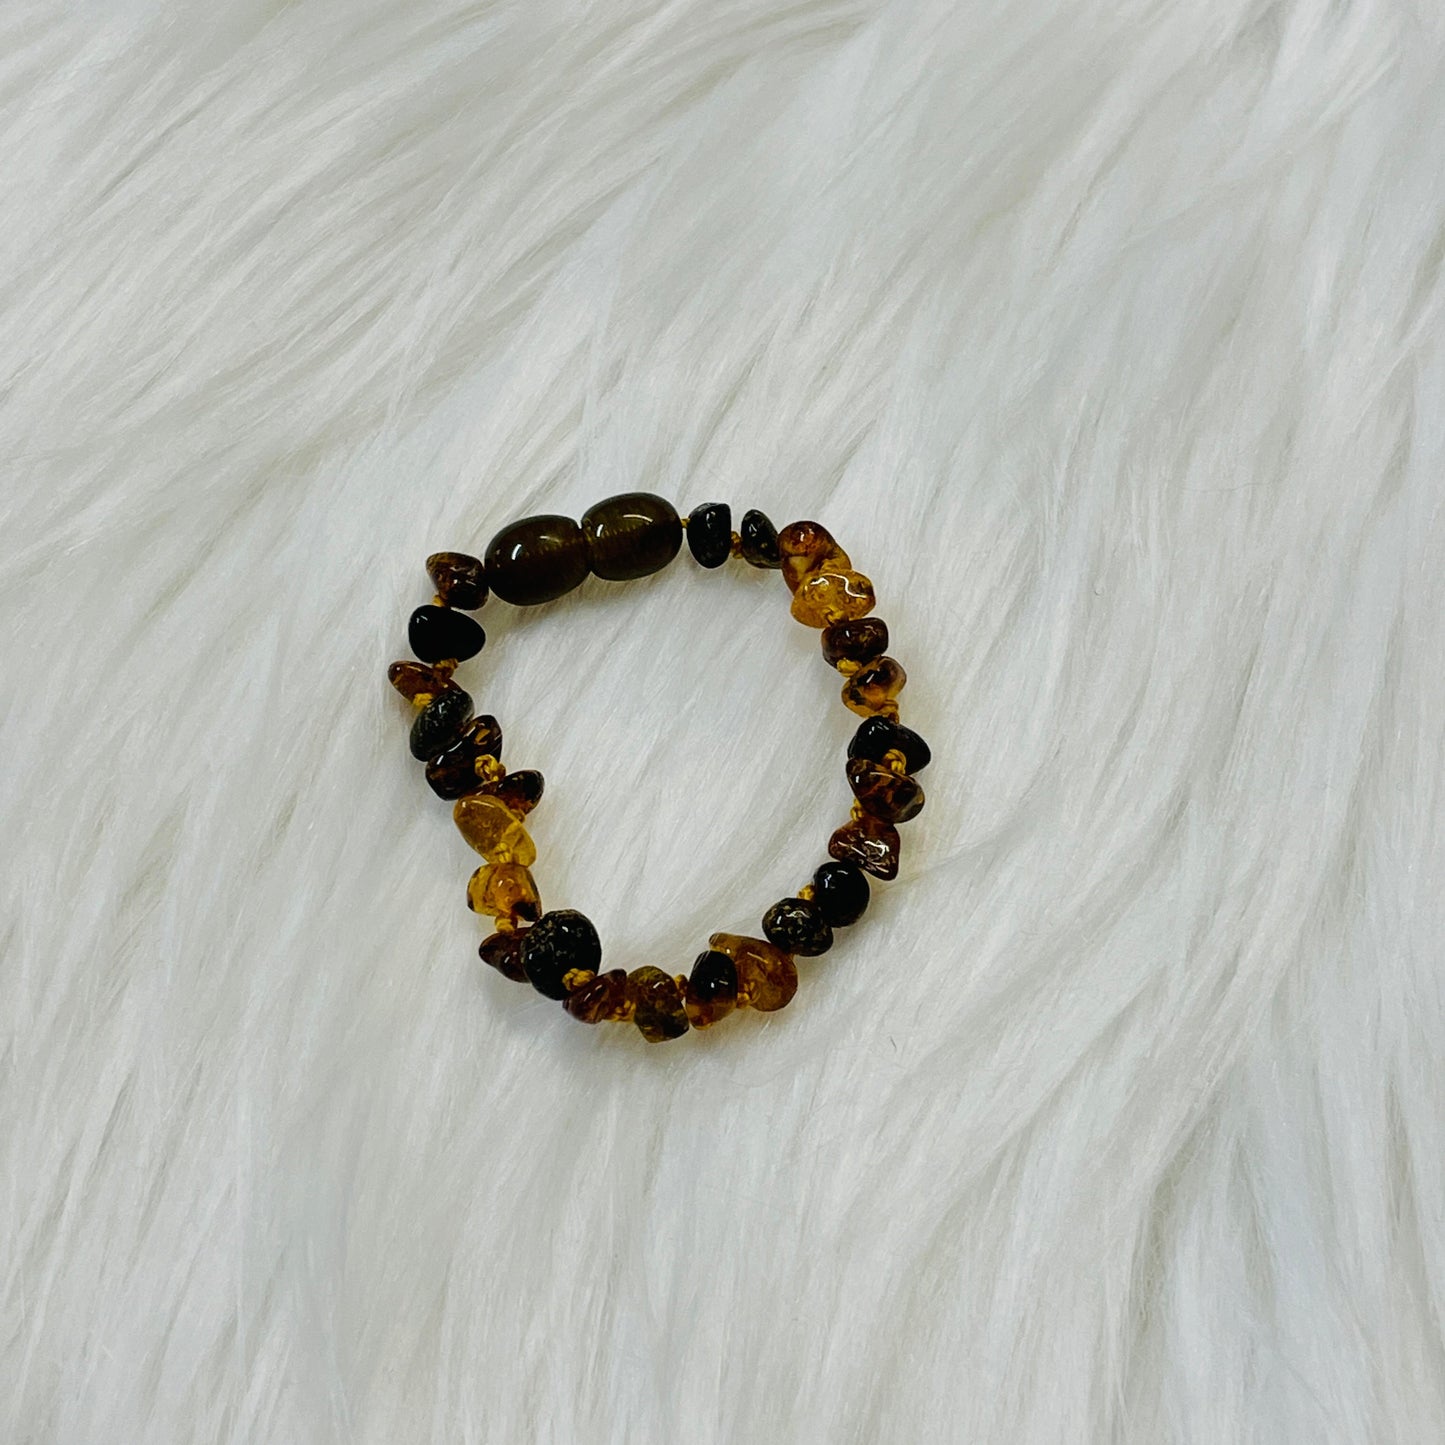 Authentic Lithuanian Baltic Amber Polished Multi Anklet - 4.5"